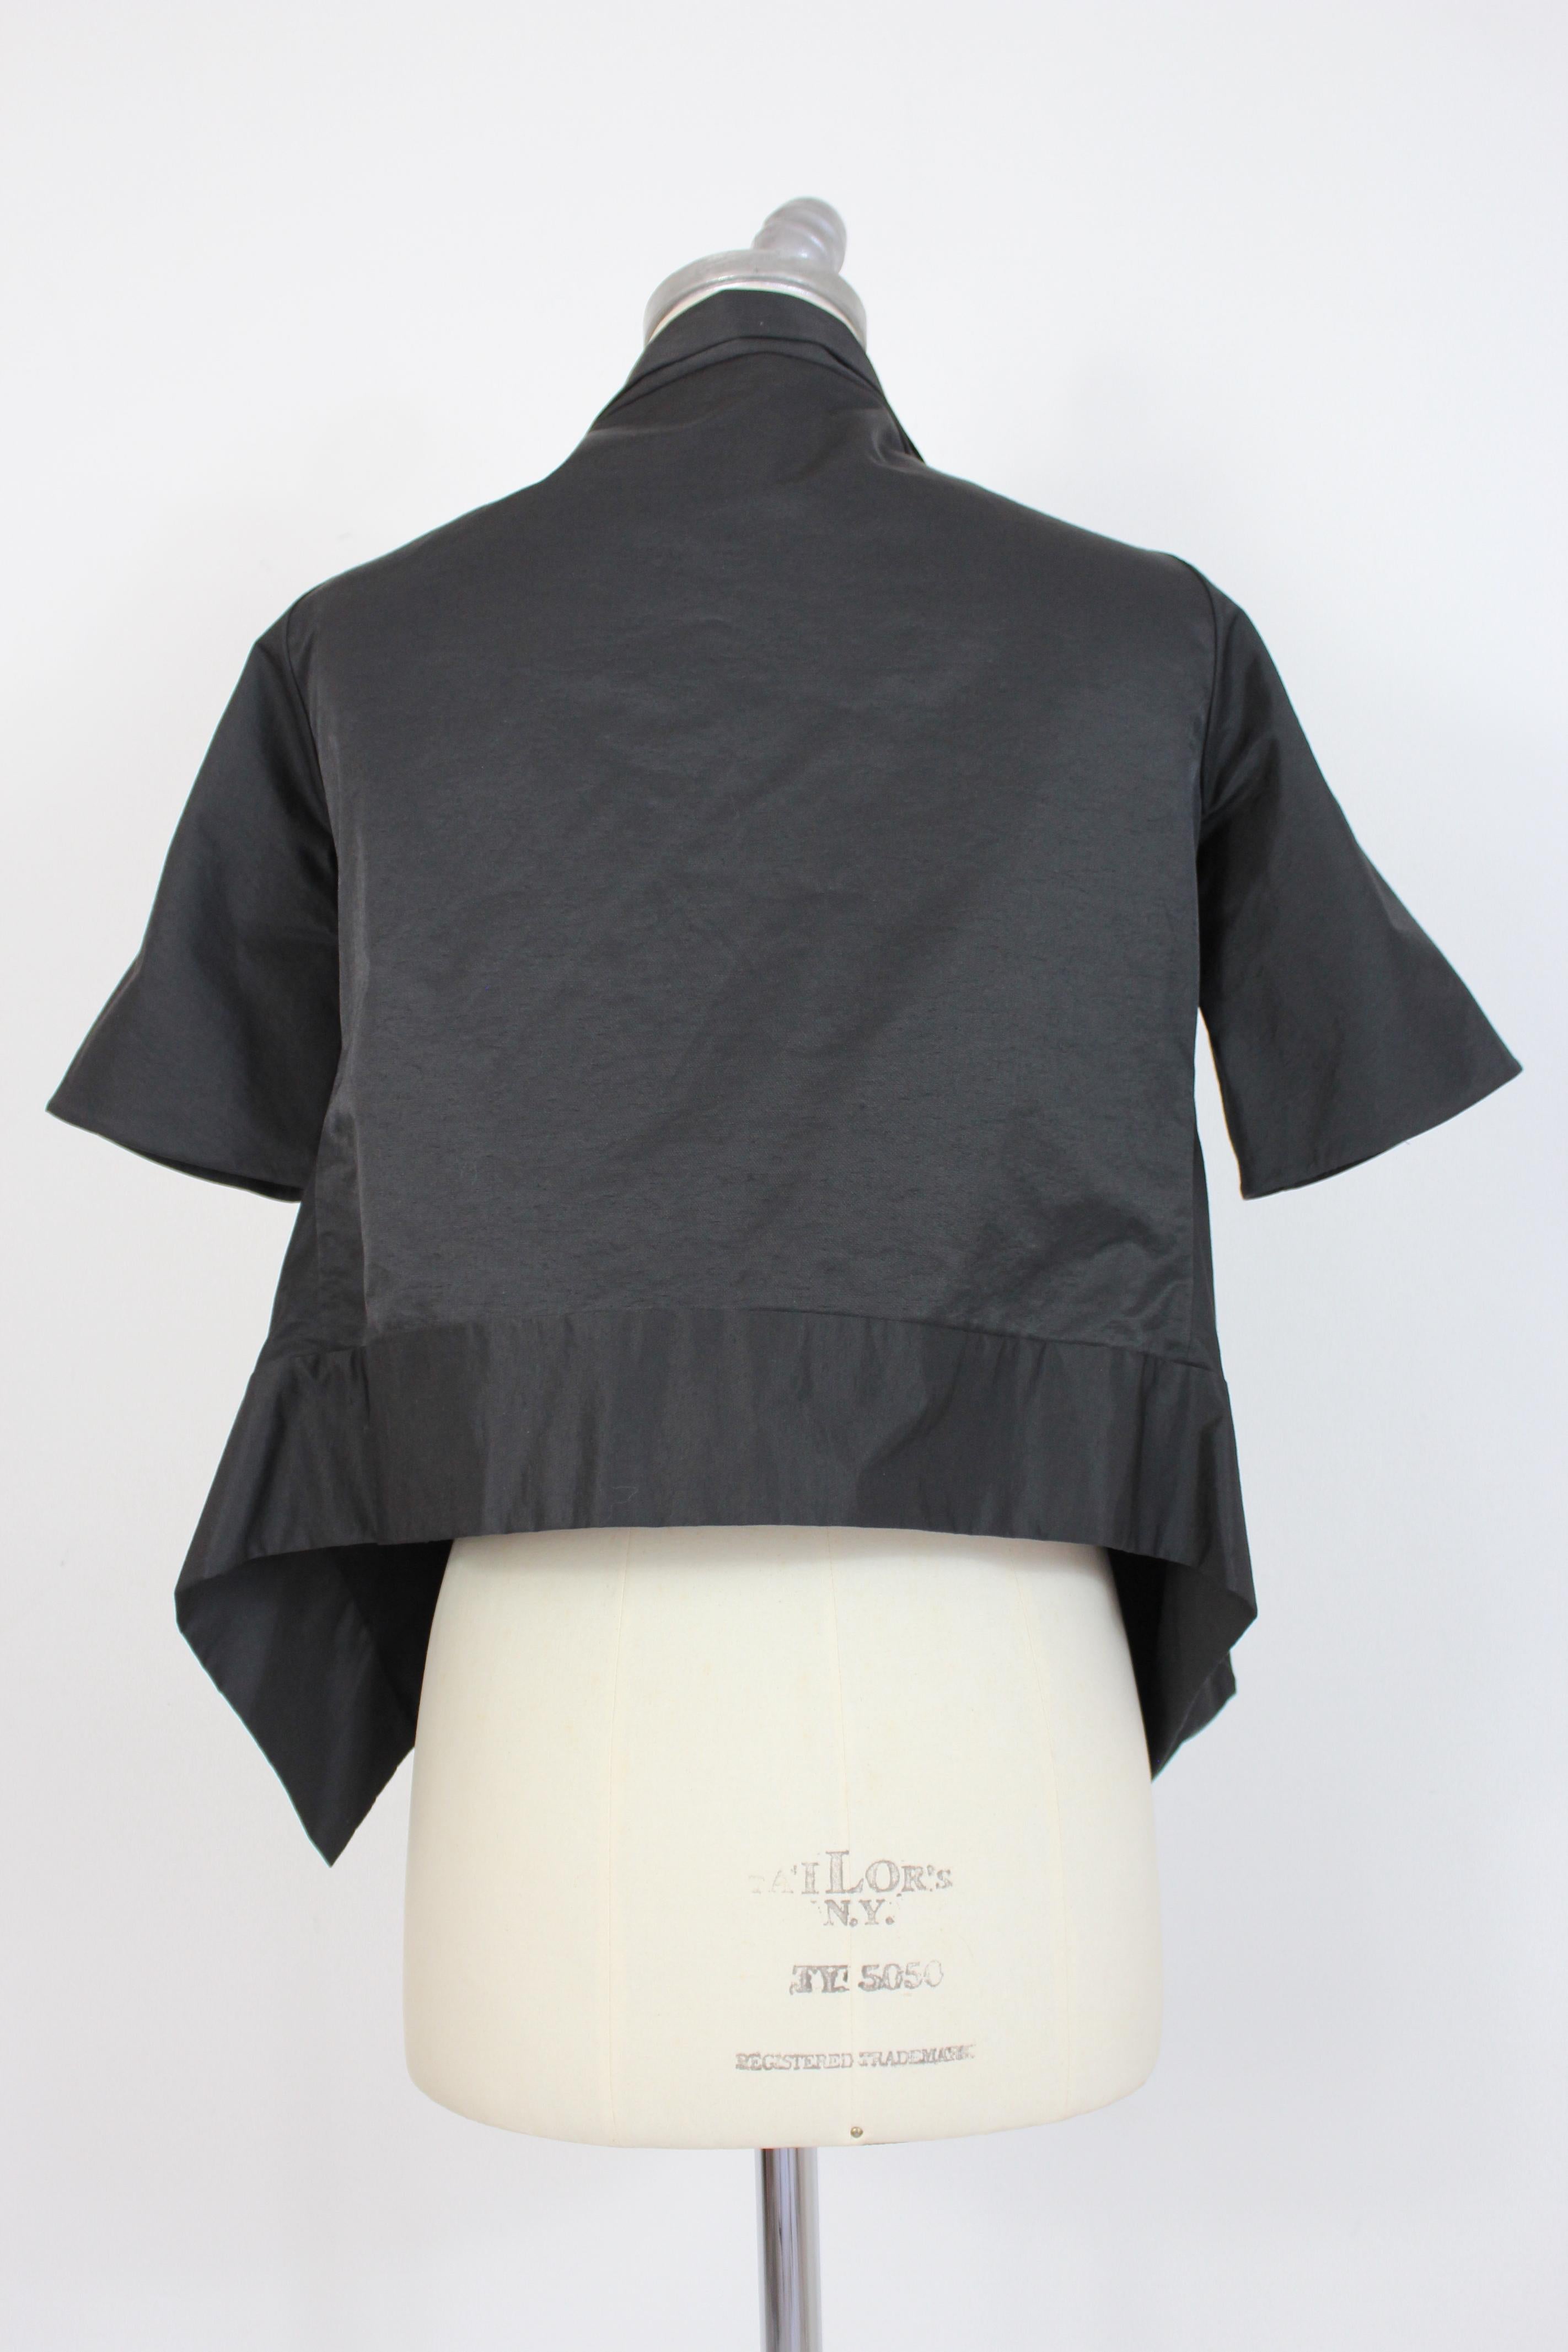 Akira Isogawa vintage 80s women's jacket. Short asymmetrical bolero jacket. Glossy black color, 100% silk fabric. Jacket without buttons, short sleeves. Internally lined. Made in Australia.

Condition: Excellent.

Item used few times, it remains in